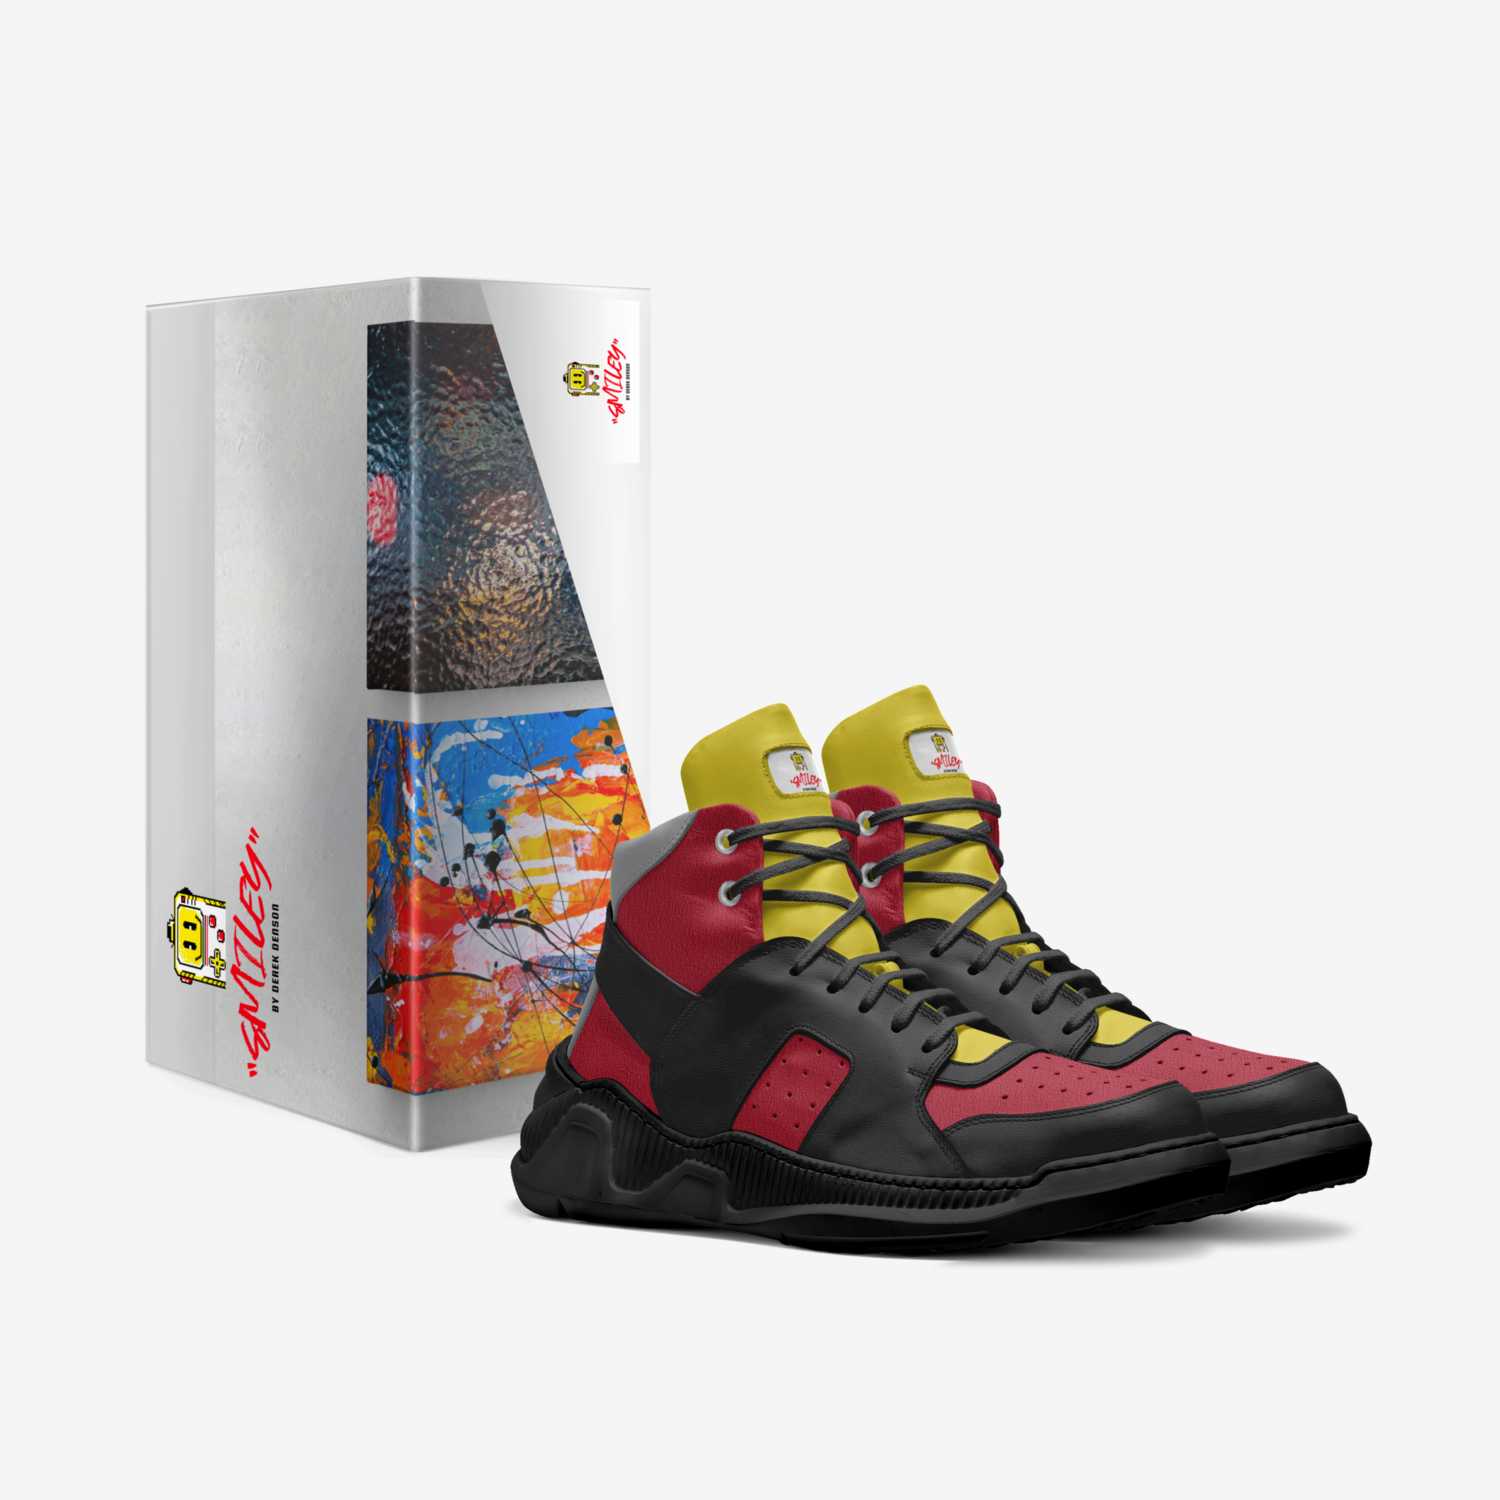 Smiley Arteest 1's custom made in Italy shoes by Derek Denson | Box view